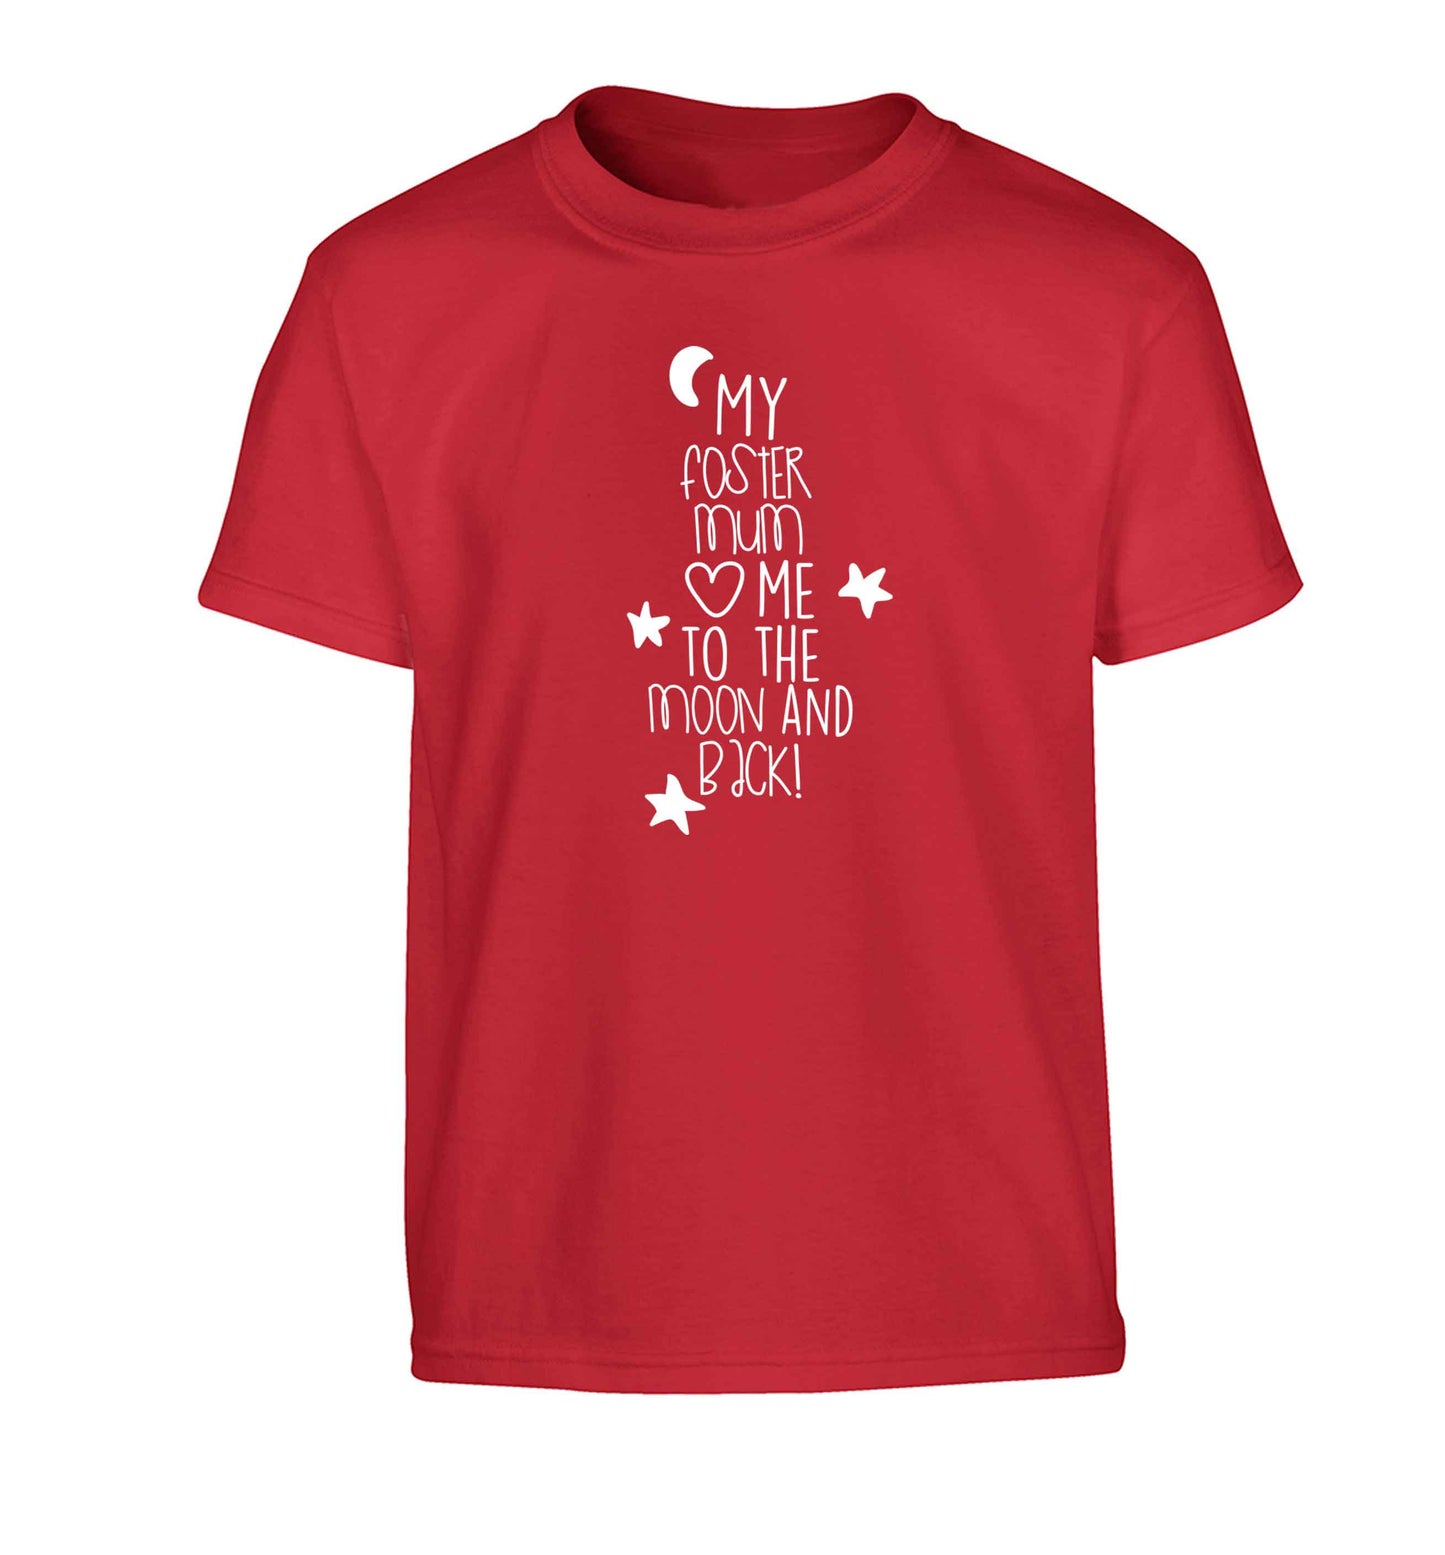 My foster mum loves me to the moon and back Children's red Tshirt 12-13 Years